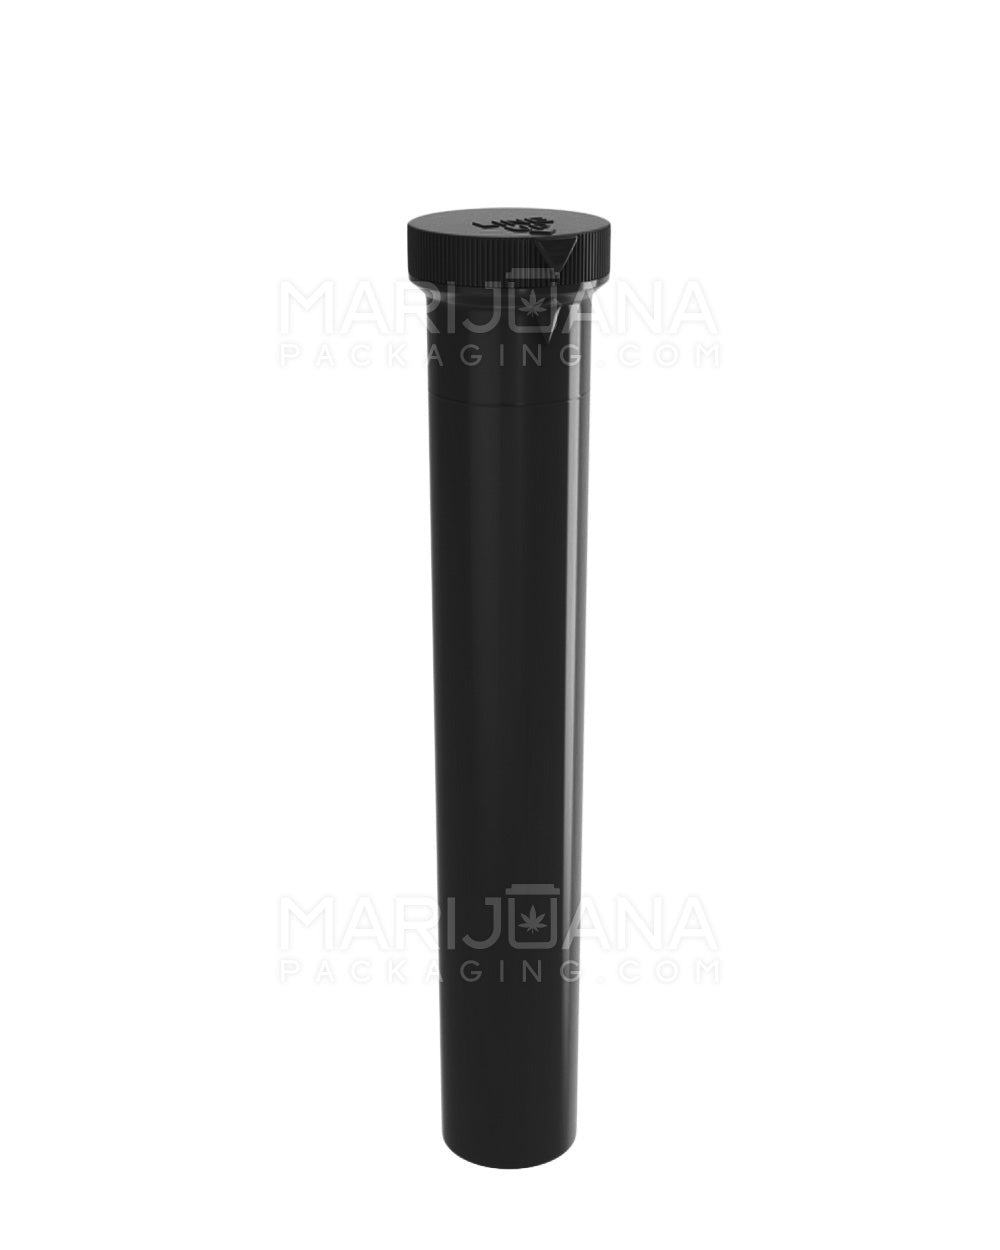 Child Resistant | King Size ‘Line-Up Arrow’ Pre-Roll Tubes | 116mm - Opaque Black Plastic - 500 Count - 1